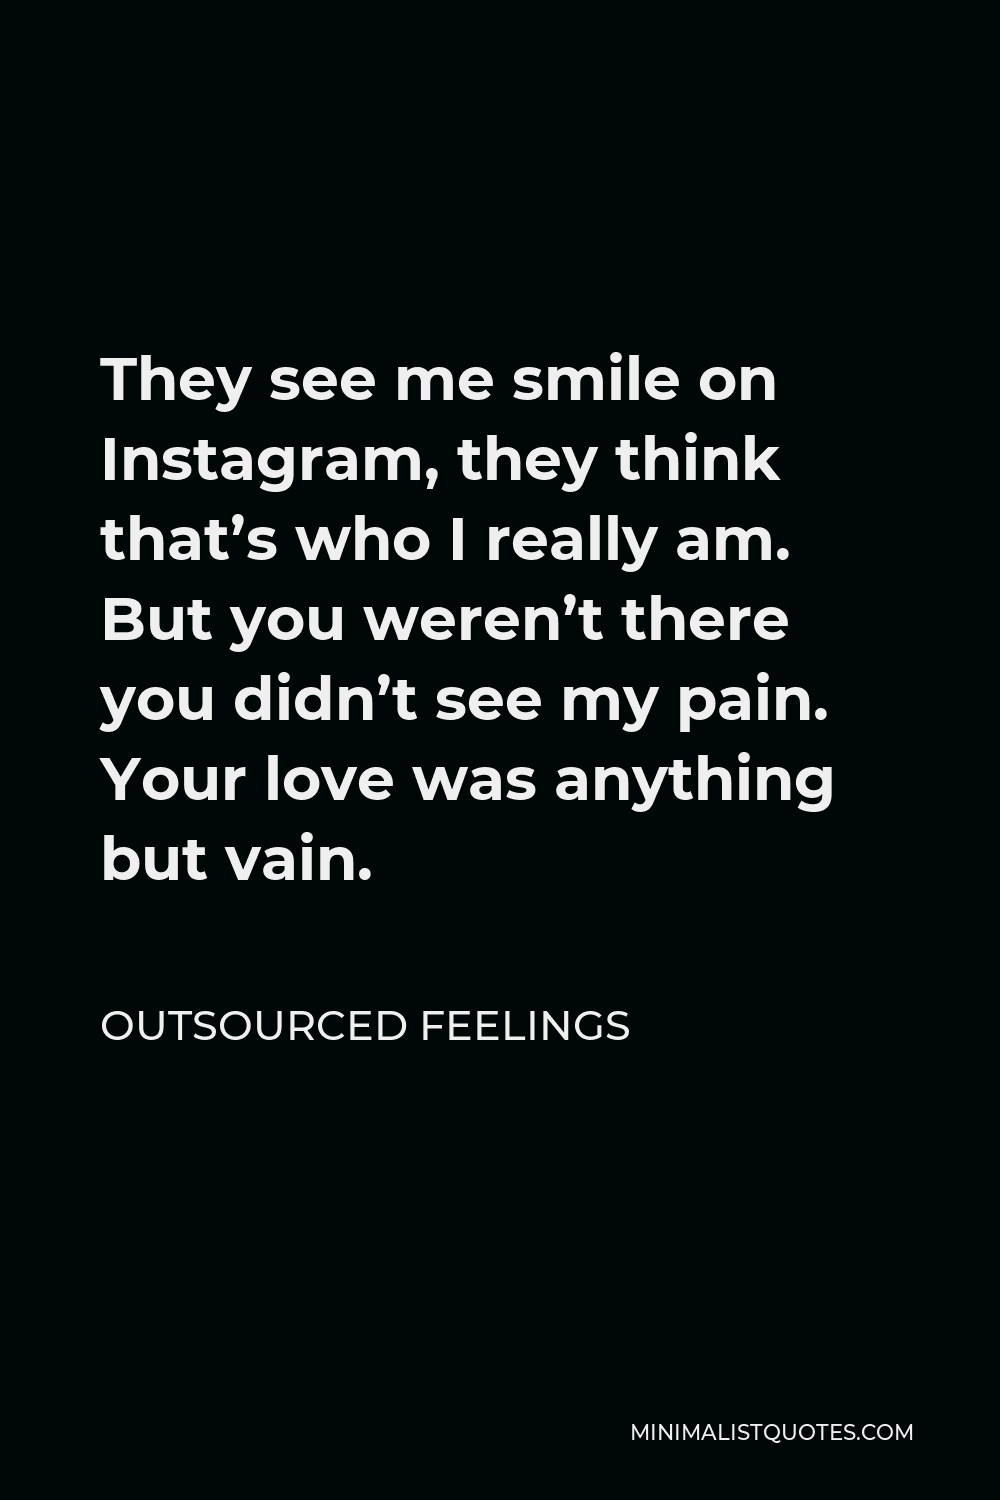 Outsourced Feelings Quote - They see me smile on Instagram, they think that’s who I really am. But you weren’t there you didn’t see my pain. Your love was anything but vain.